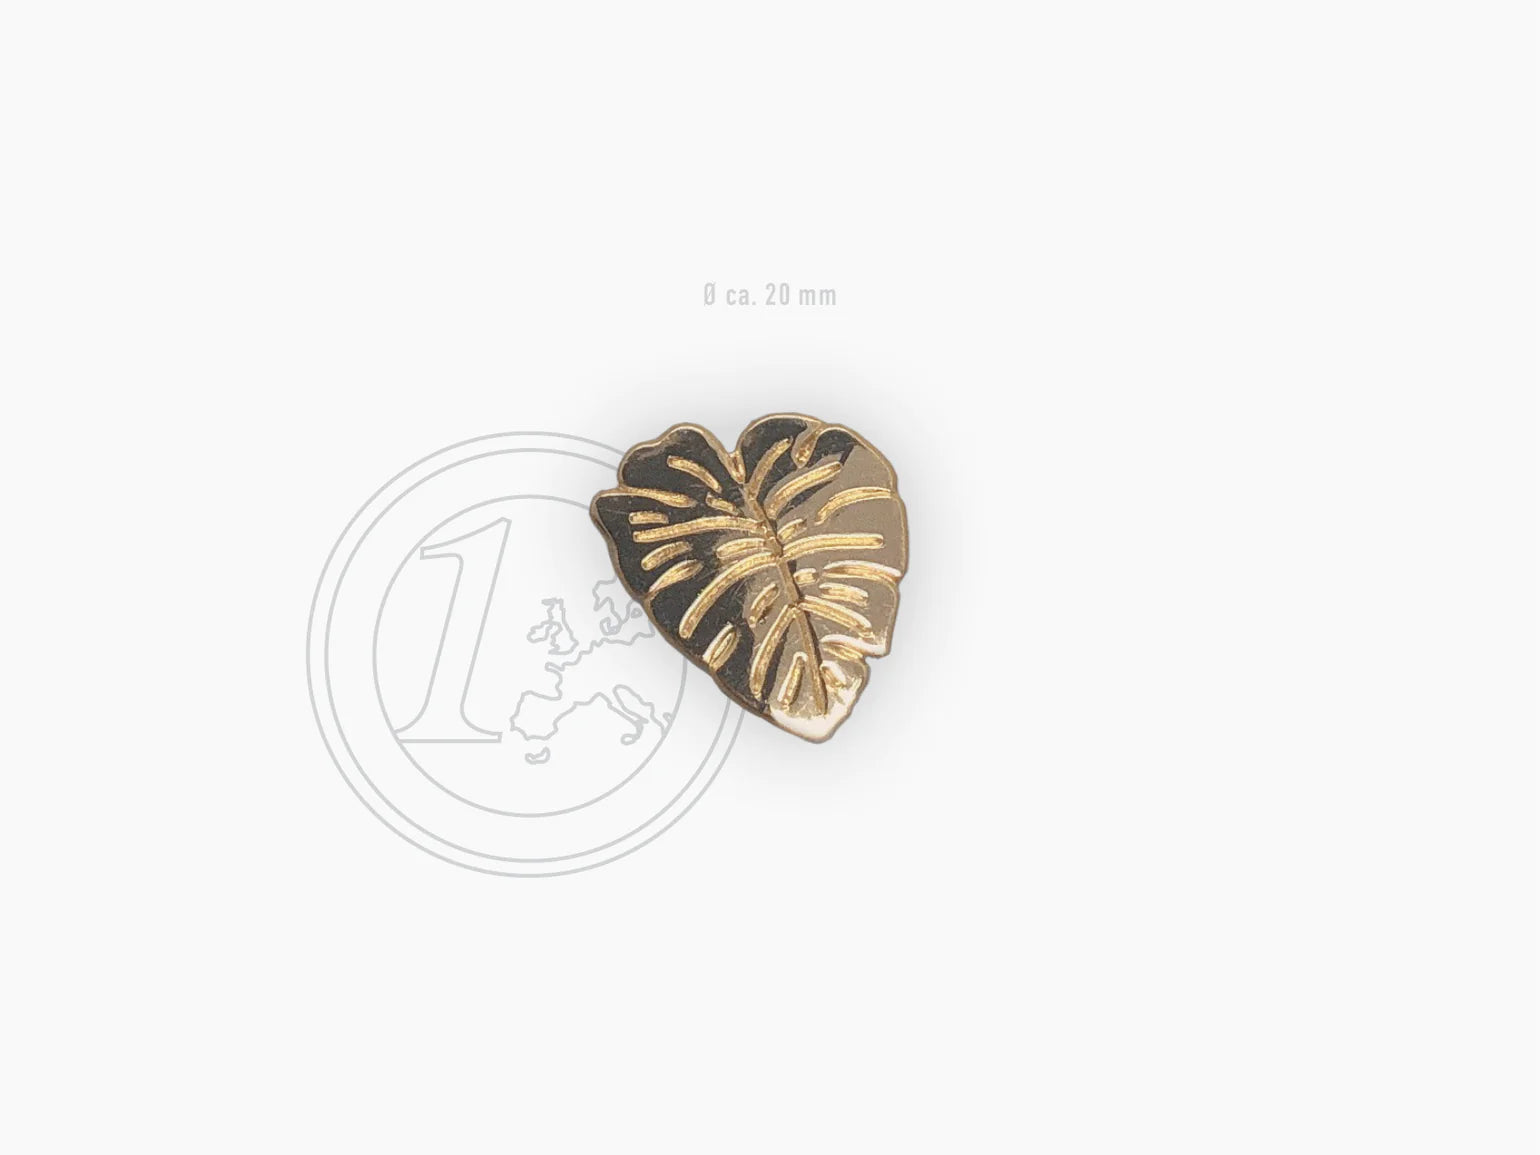 gold plated handmade plant leaf pin by Typealive, size comparison with euro coin